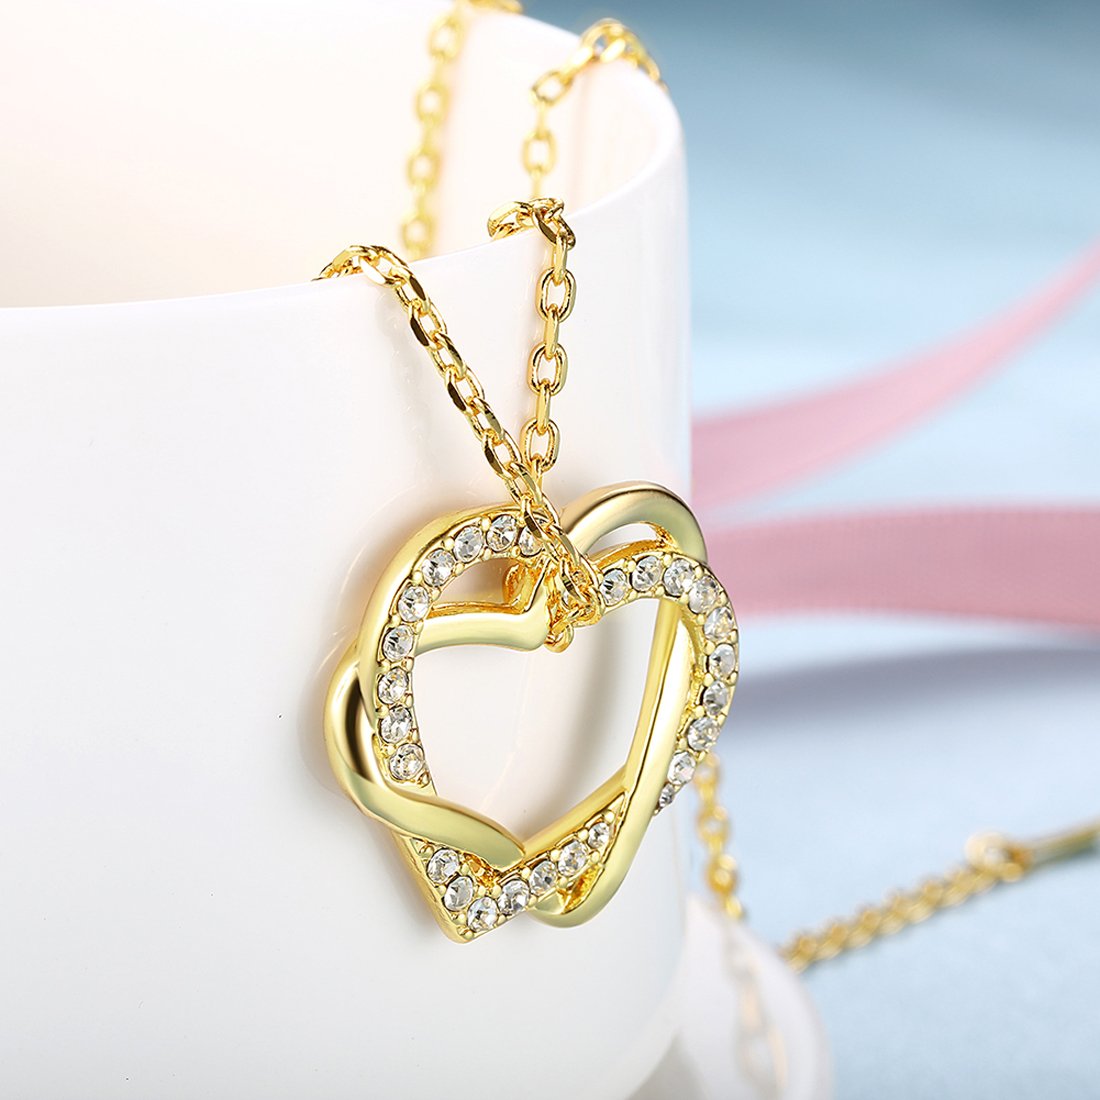 Yellow Chimes Heart Pendant for Women Embracing Hearts-in-Love 18K Real Gold Plated Austrian Crystal Pendant for Women and Girls.